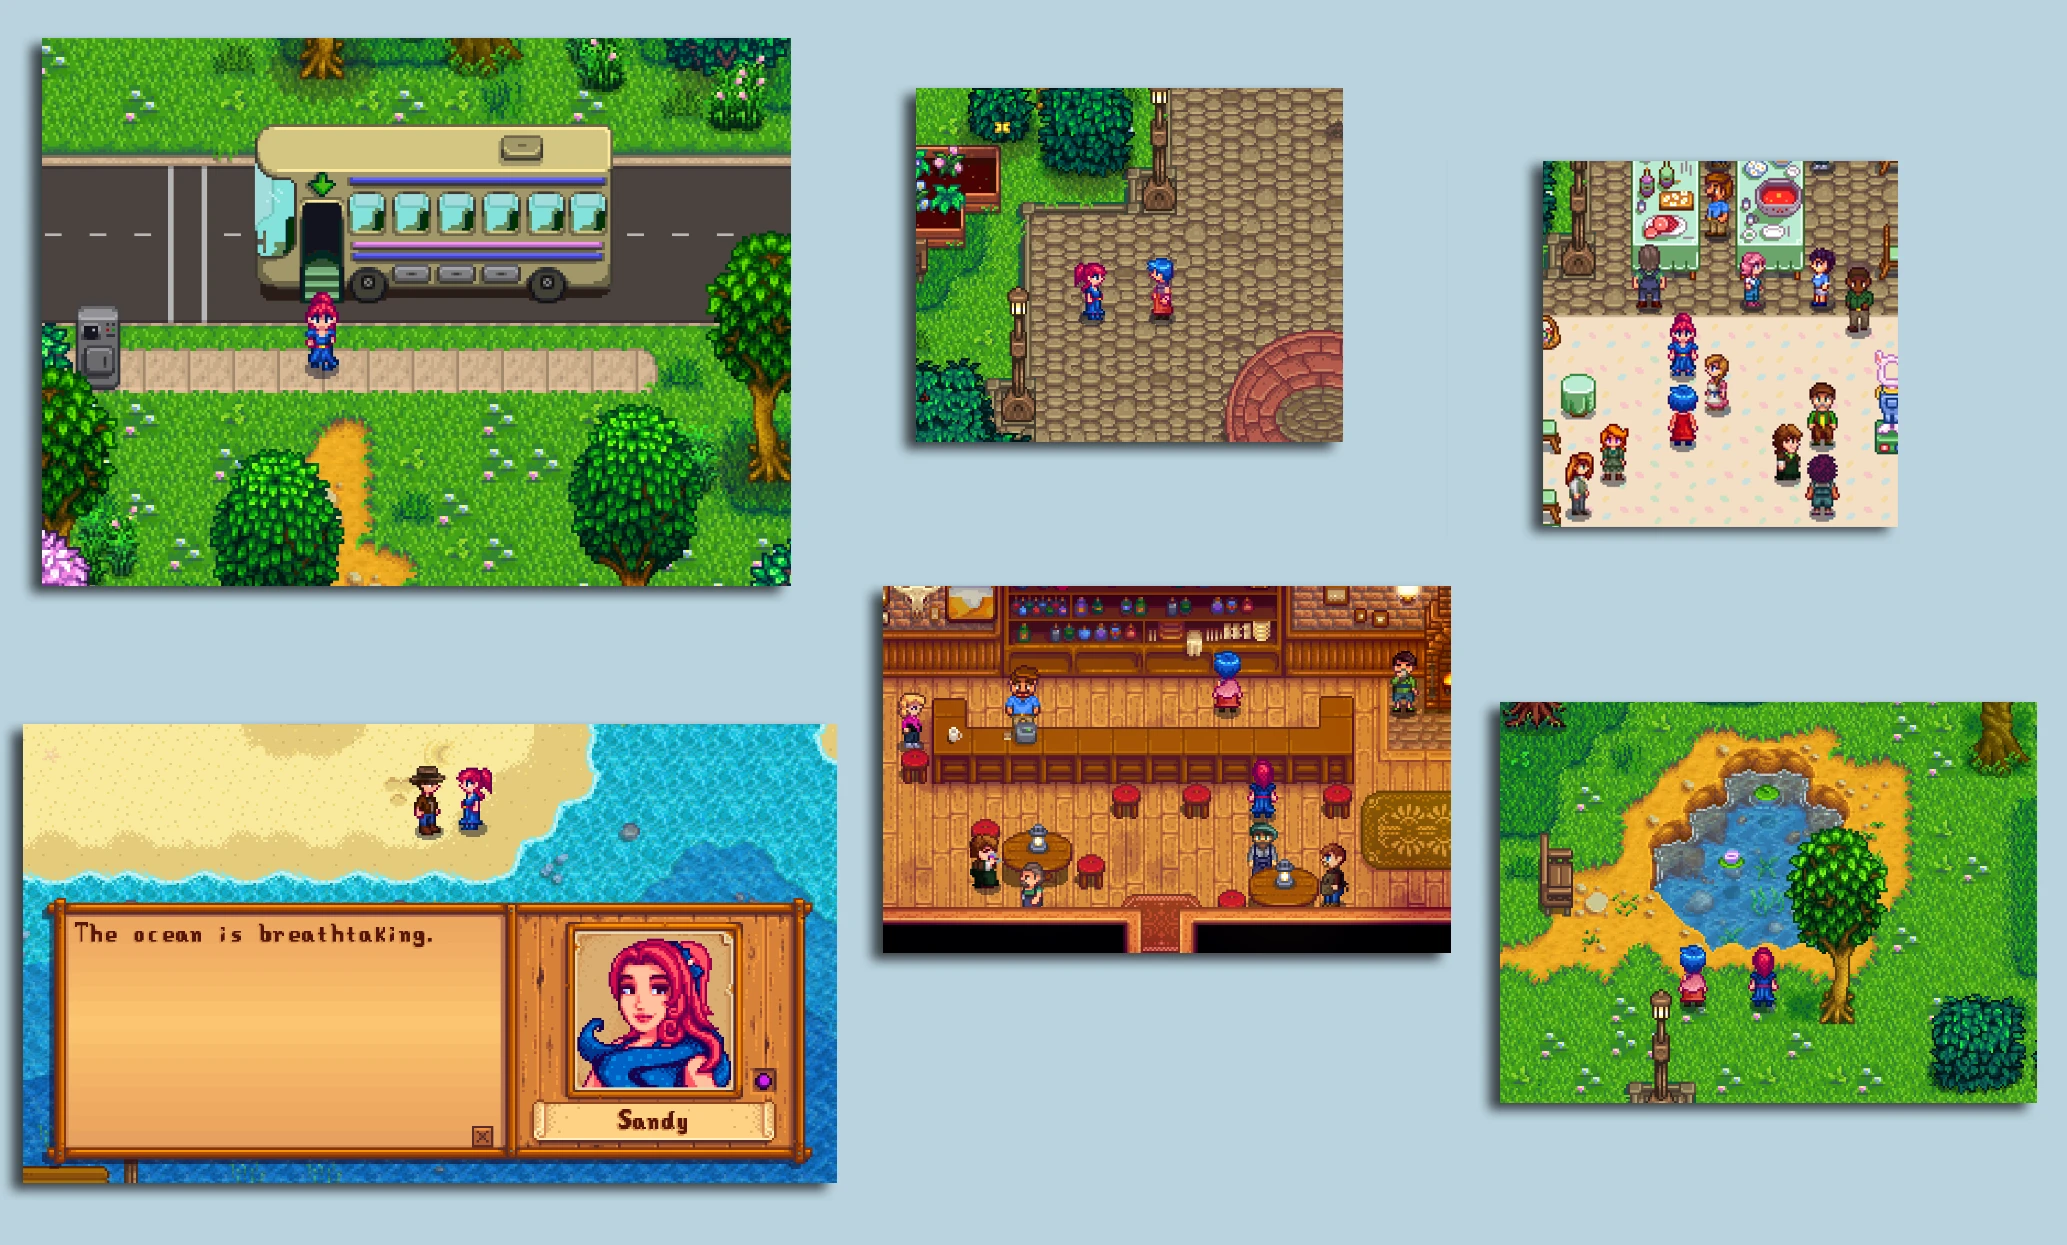 Stardew Valley Expanded - Dynamic Schedule for Sandy.